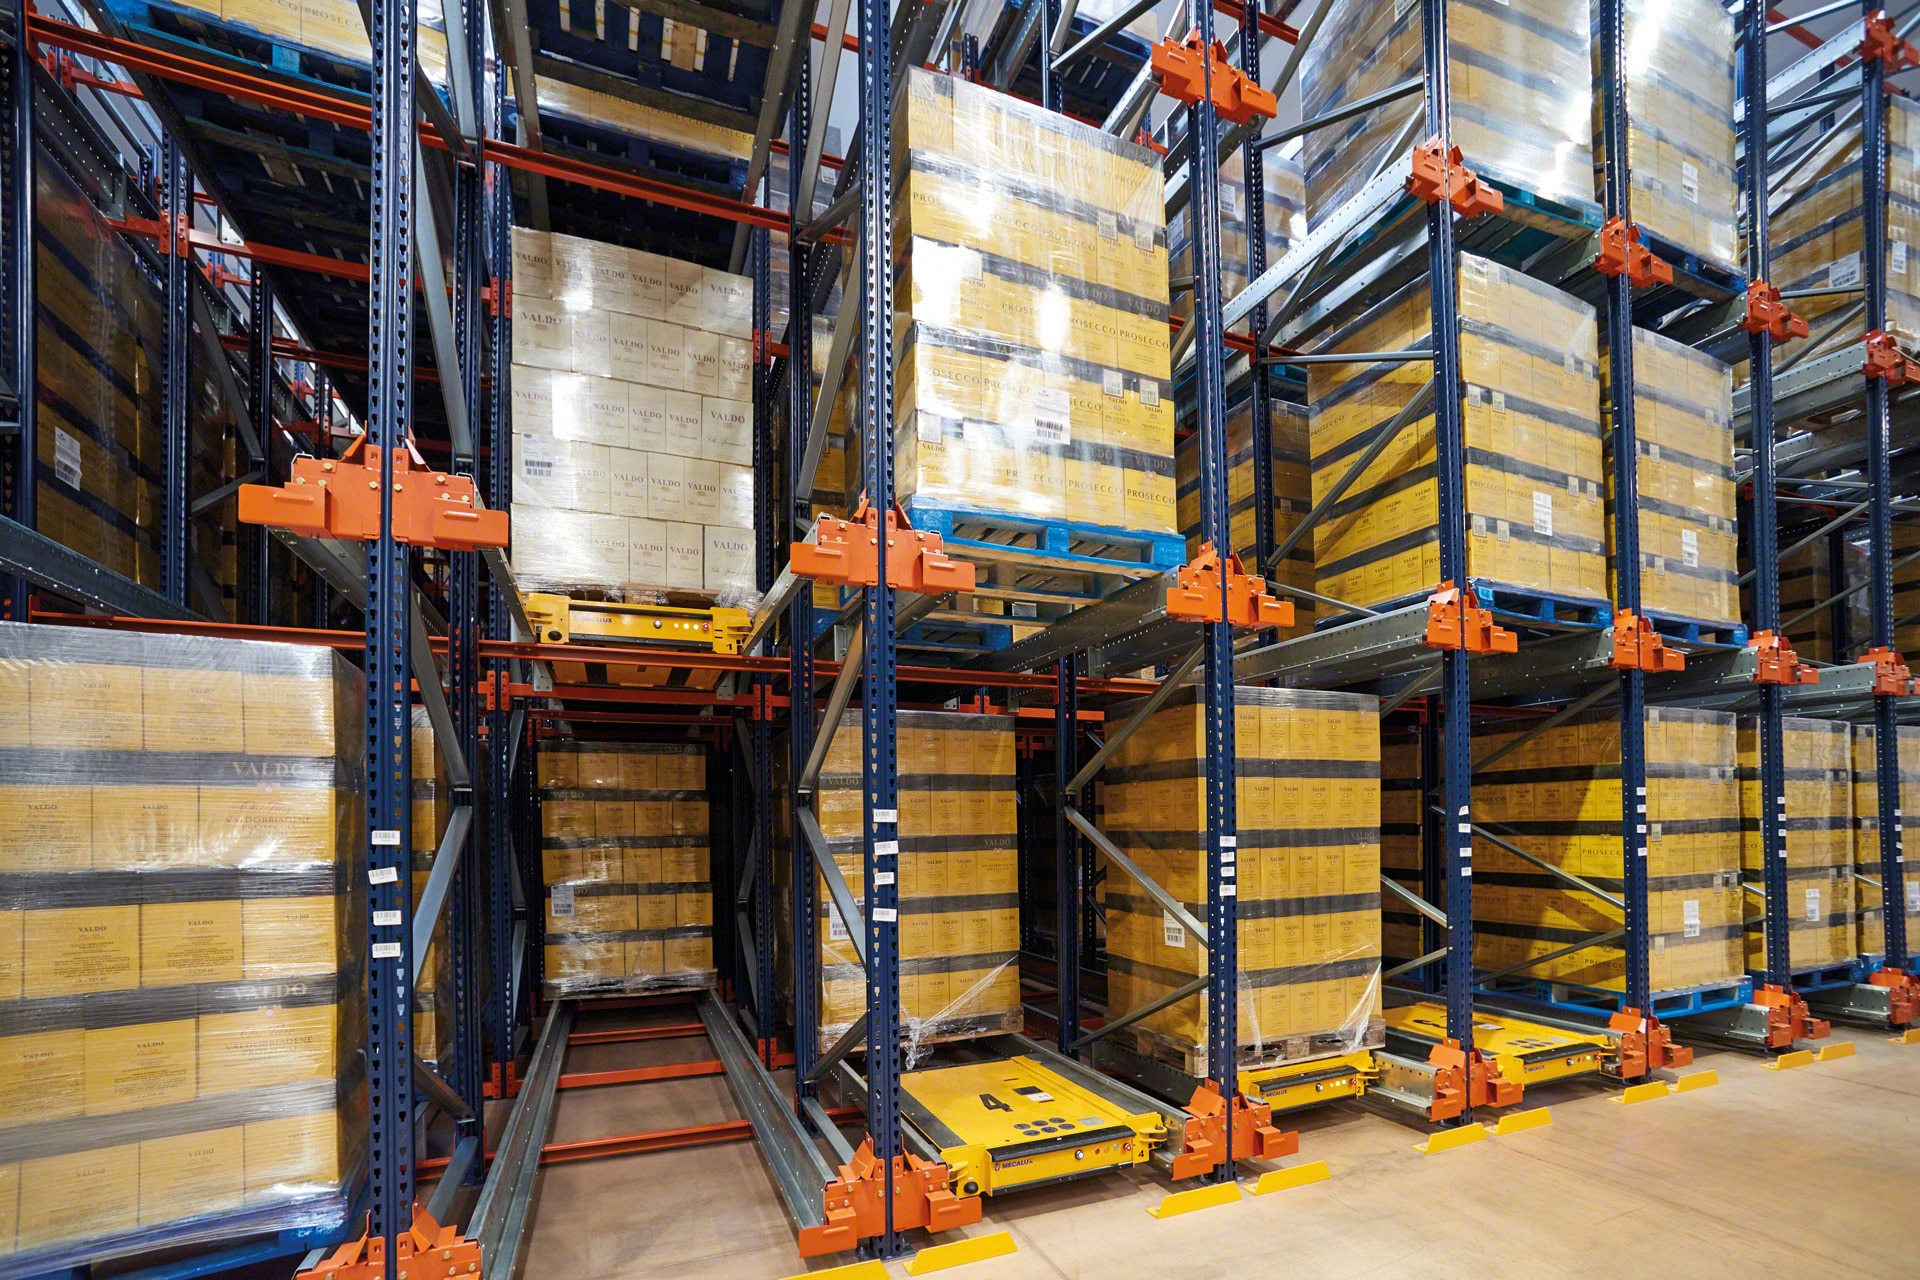 In compact racking systems, one shuttle can be placed in each channel to increase productivity.